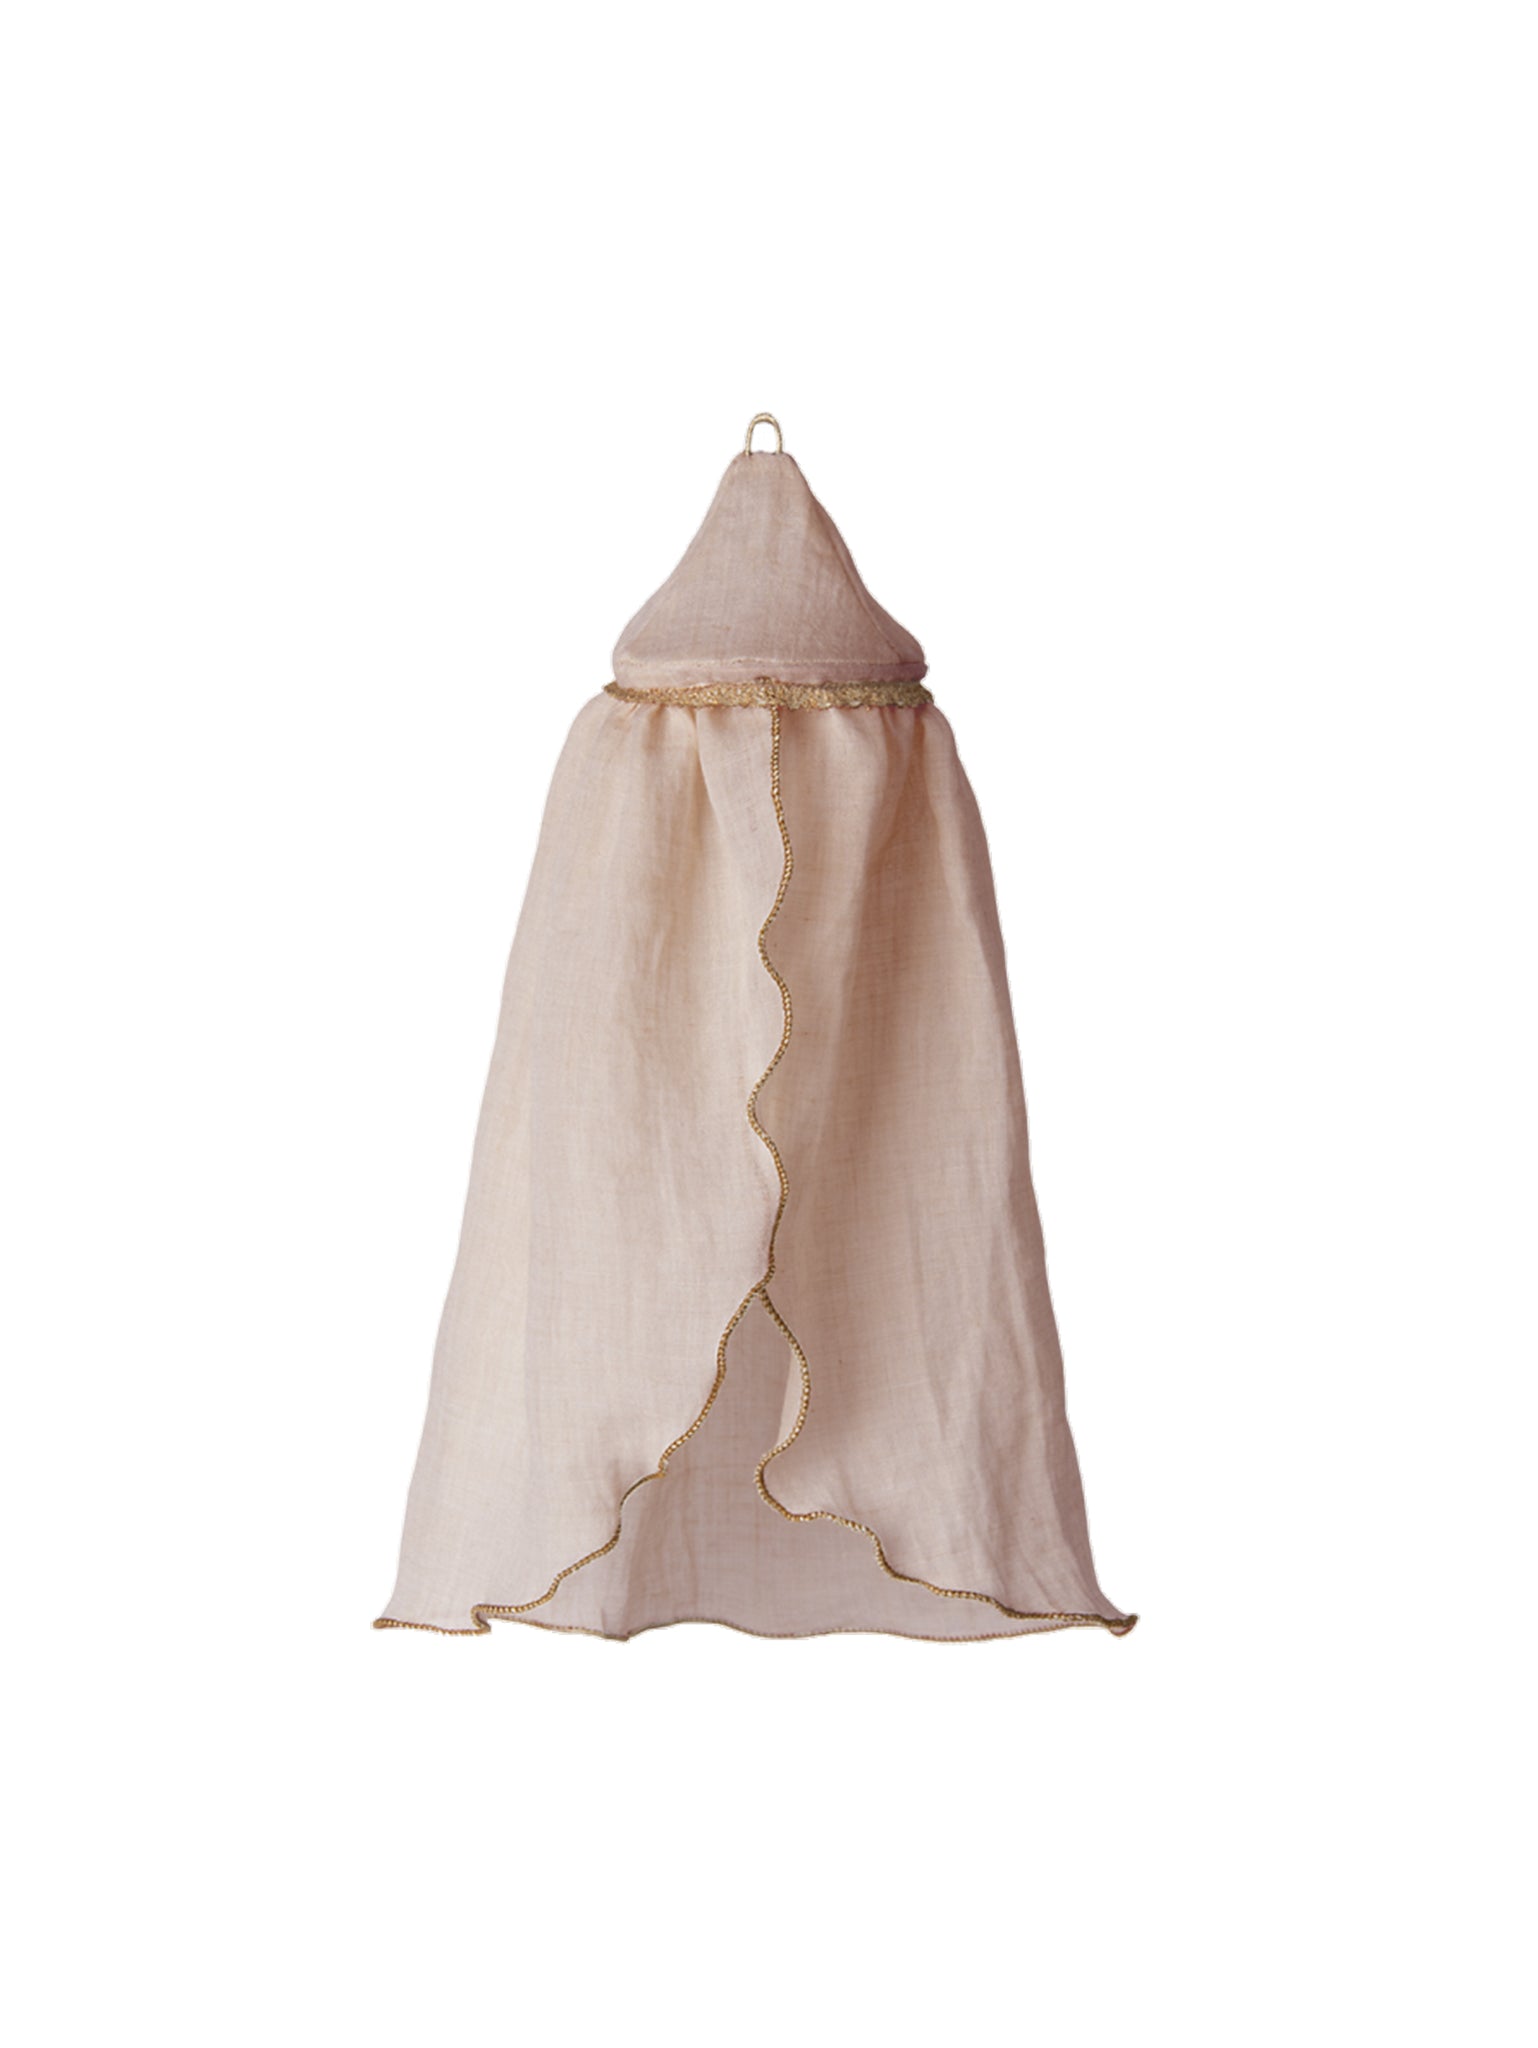 Maileg Miniature Bed Canopy Rose Weston Table